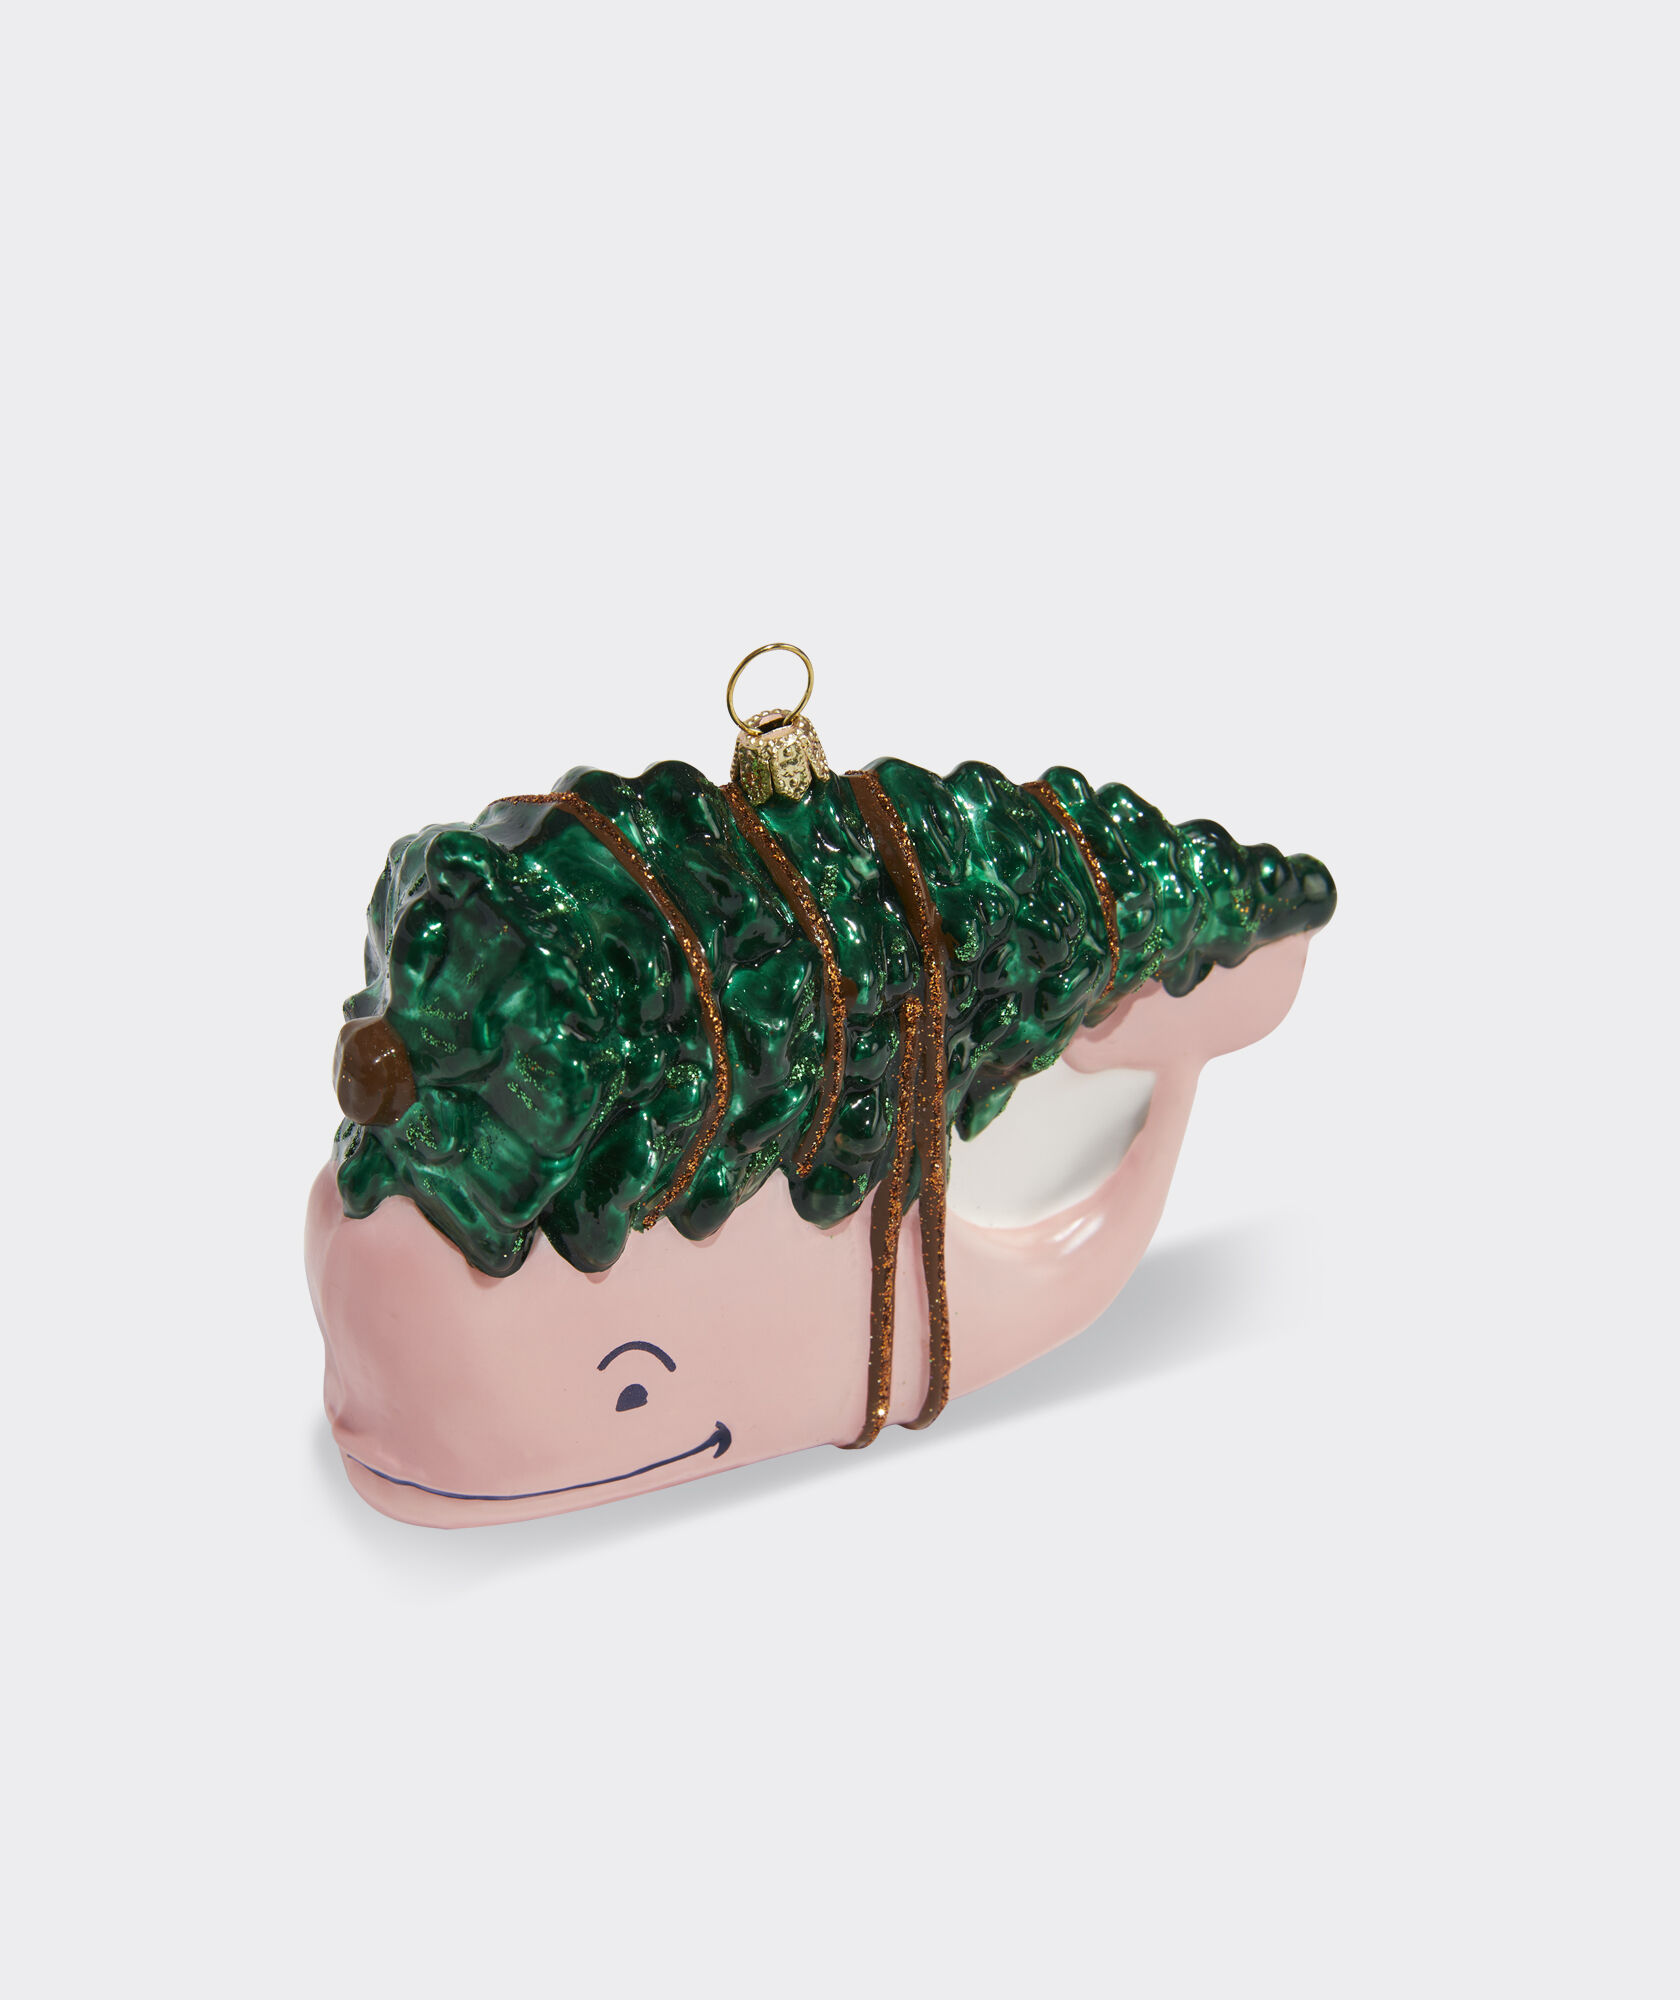 Whale & Tree Ornament